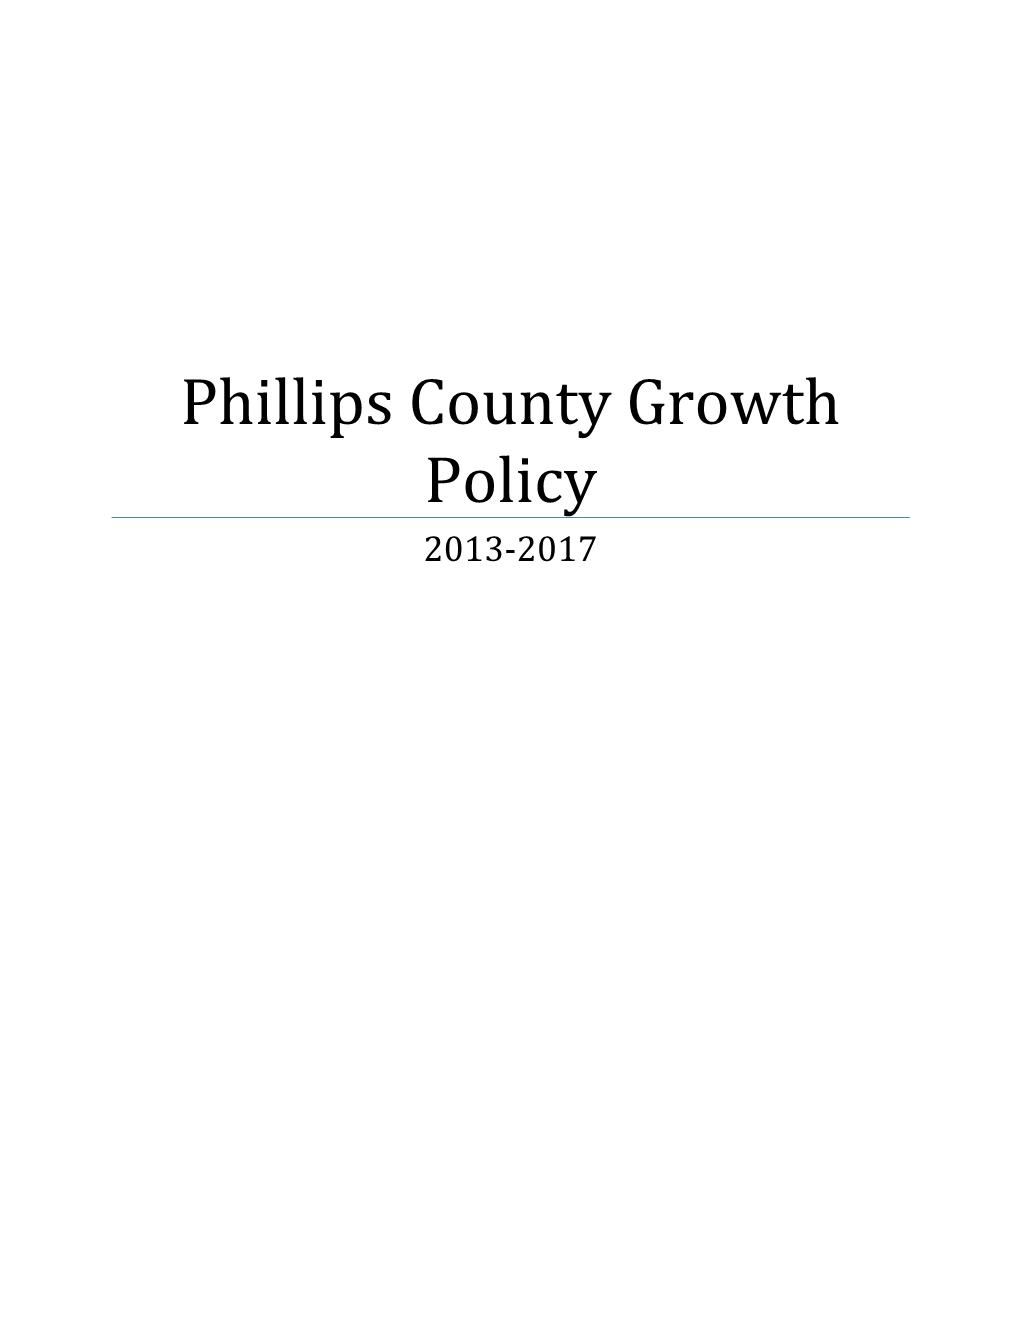 Phillips County Growth Policy 2013-2017